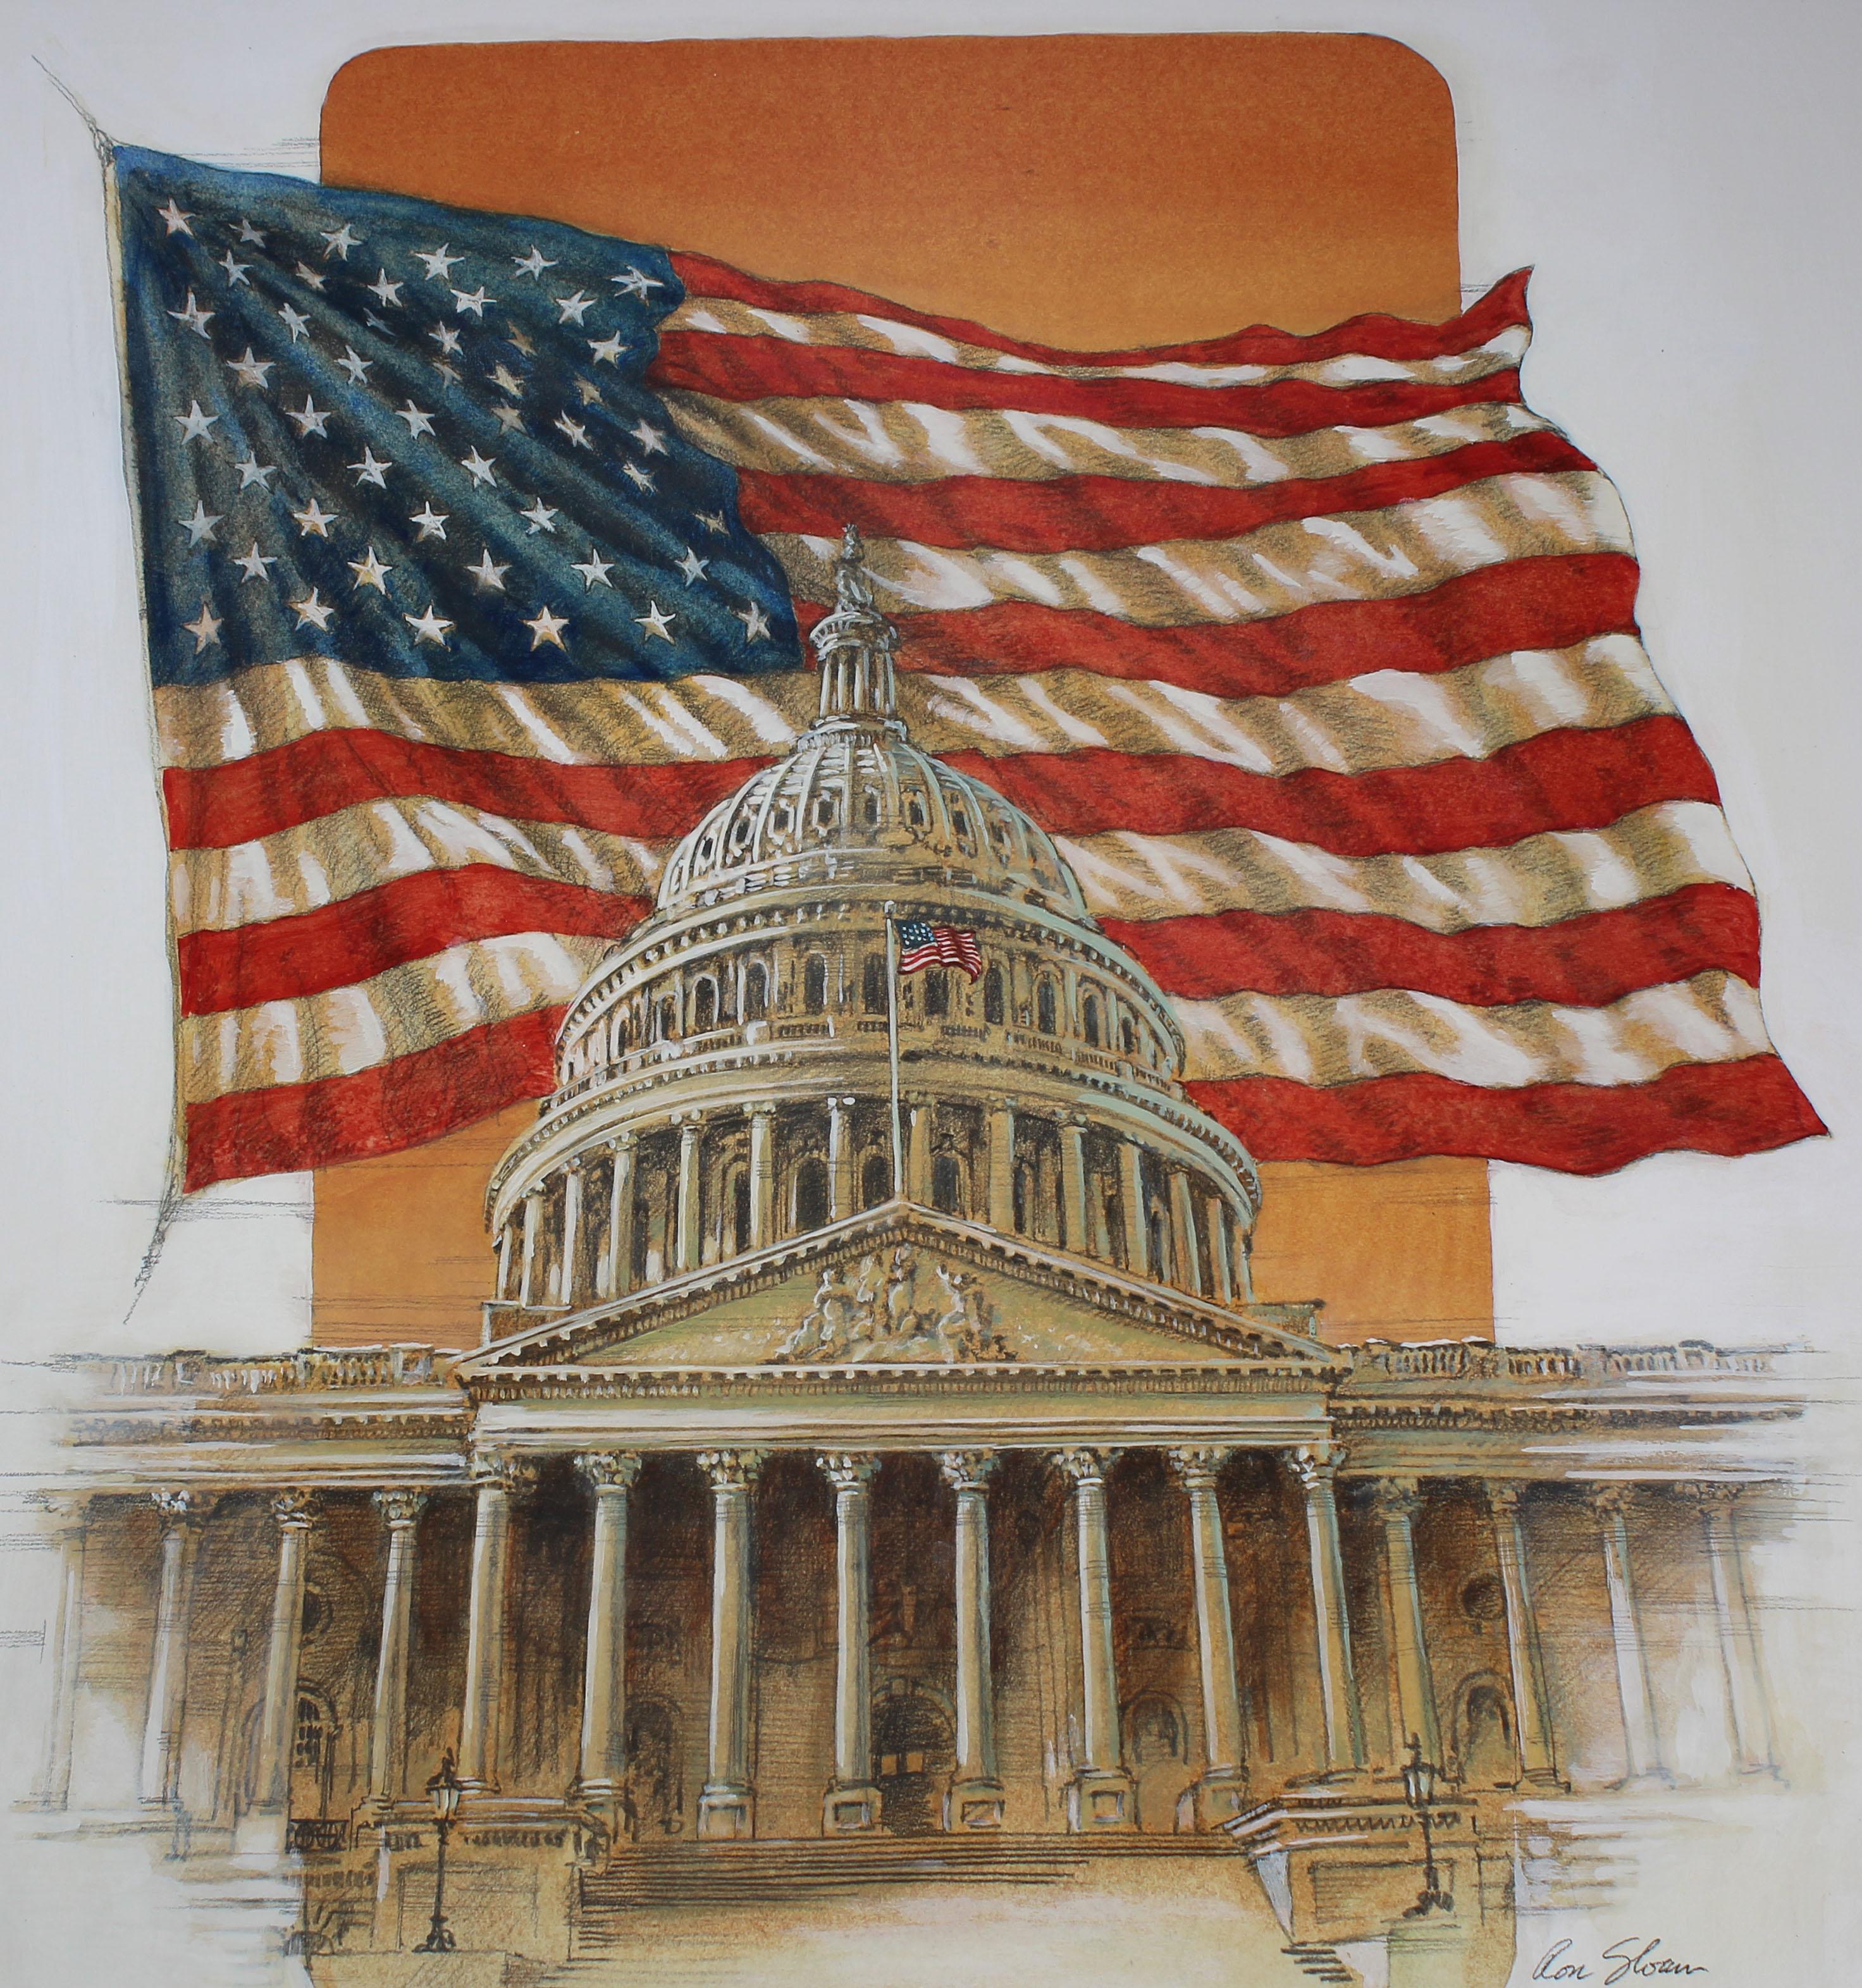 Presented is “U.S. Flag Behind Capitol,” an original mixed-media painting by American artist Ron Sloan.  The drawing shows an intricately detailed rendering of the front entrance to the United States Capitol building. Behind the Capitol is a large,